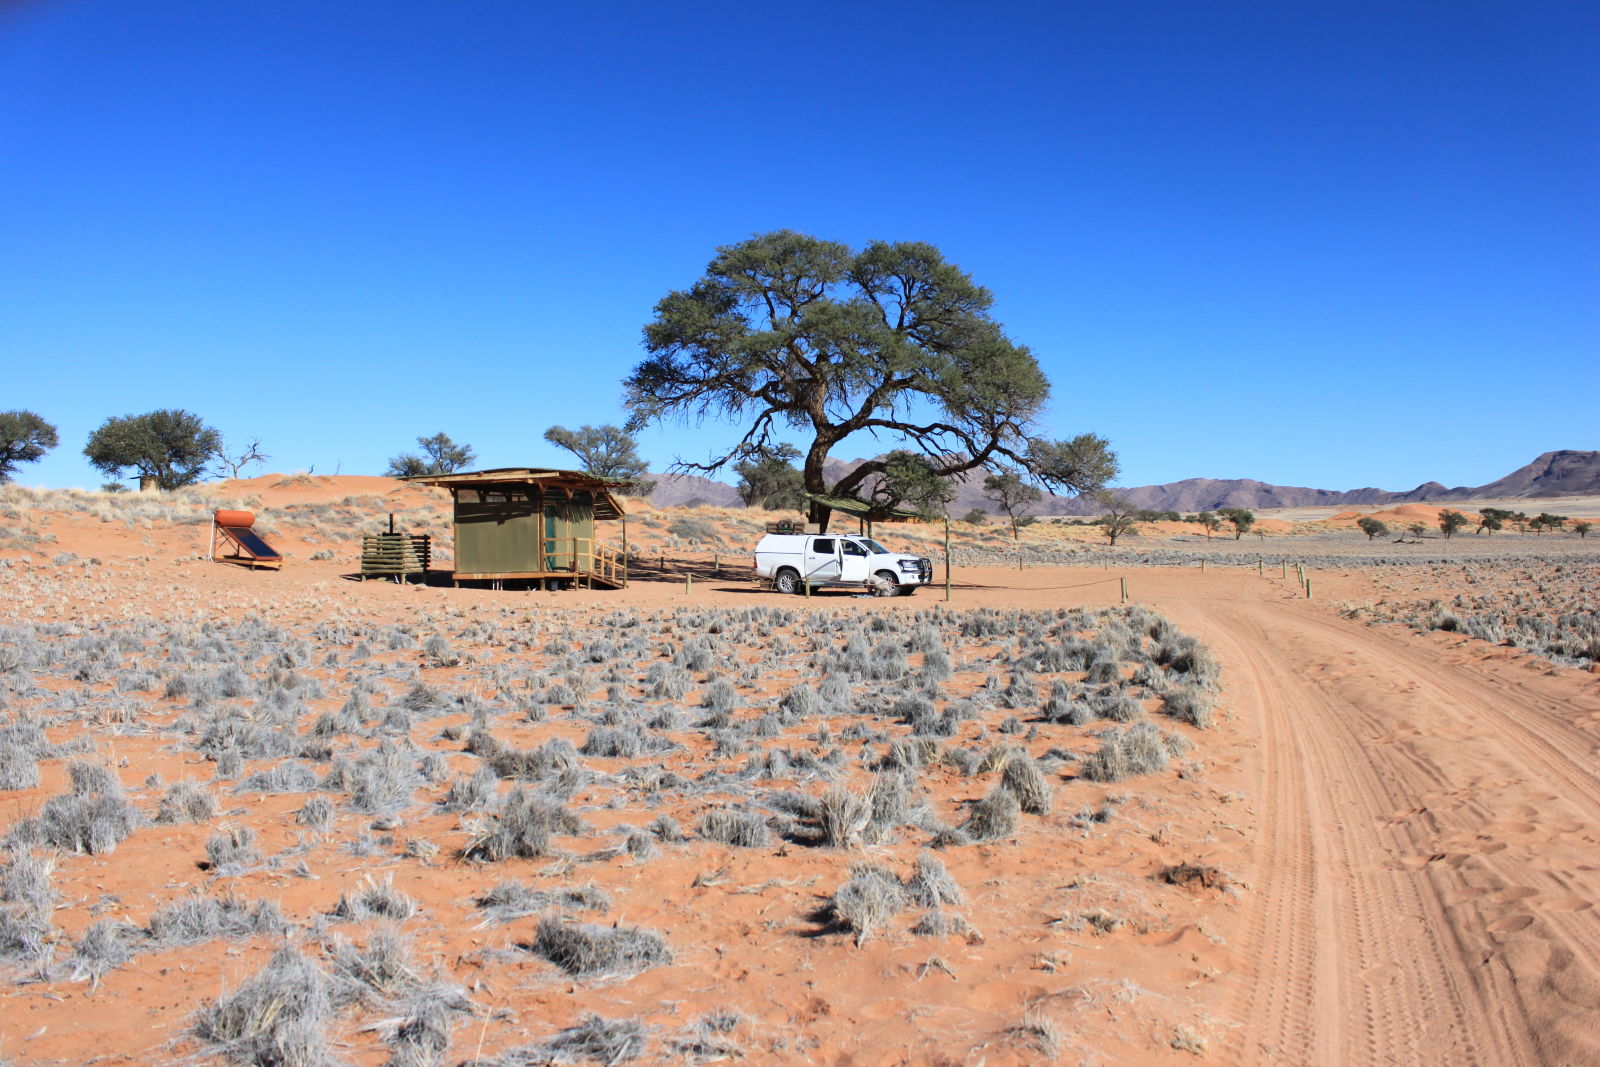 Orion Campsite, NamibRand Nature Reserve, Namibia. If you squint, you can see me airing up the tires for the drive back to Windhoek, and, eventually, home.